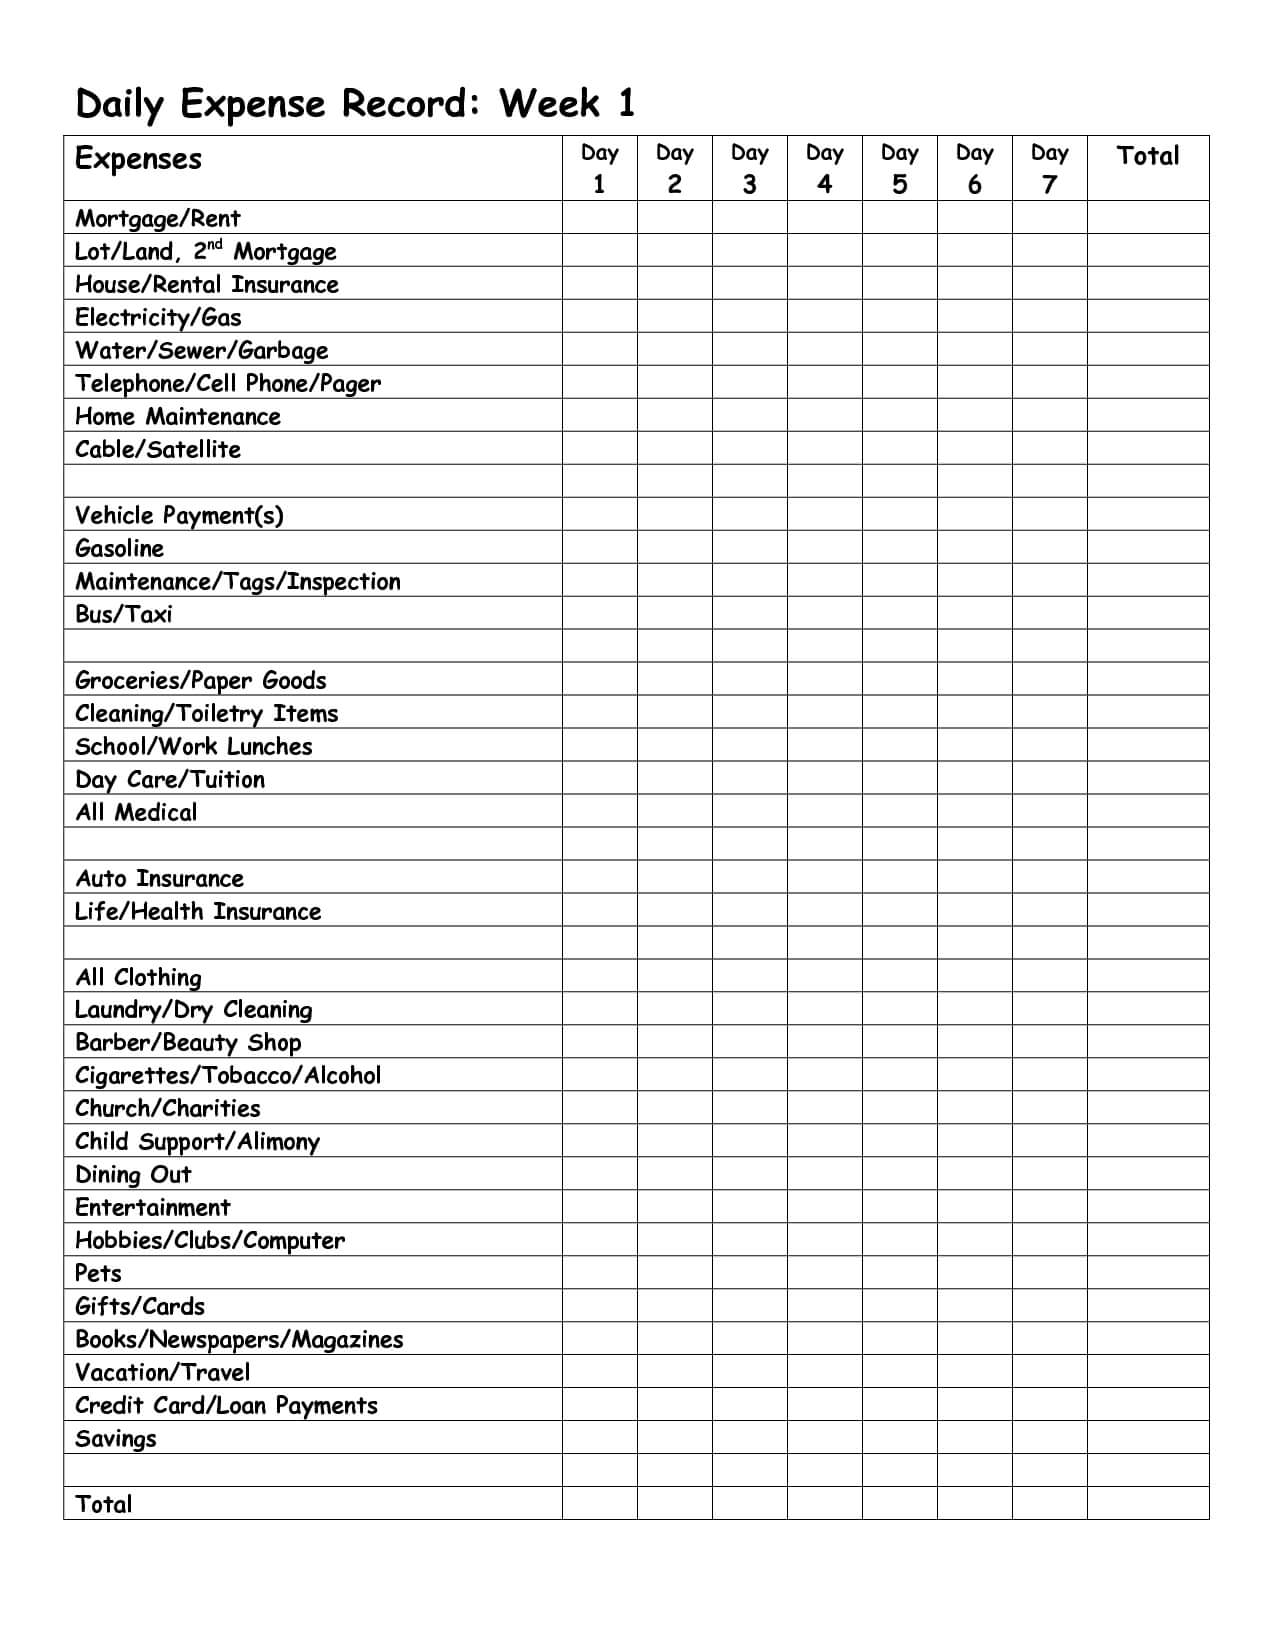 Monthly Expense Report Template | Daily Expense Record Week Pertaining To Frequent Diner Card Template